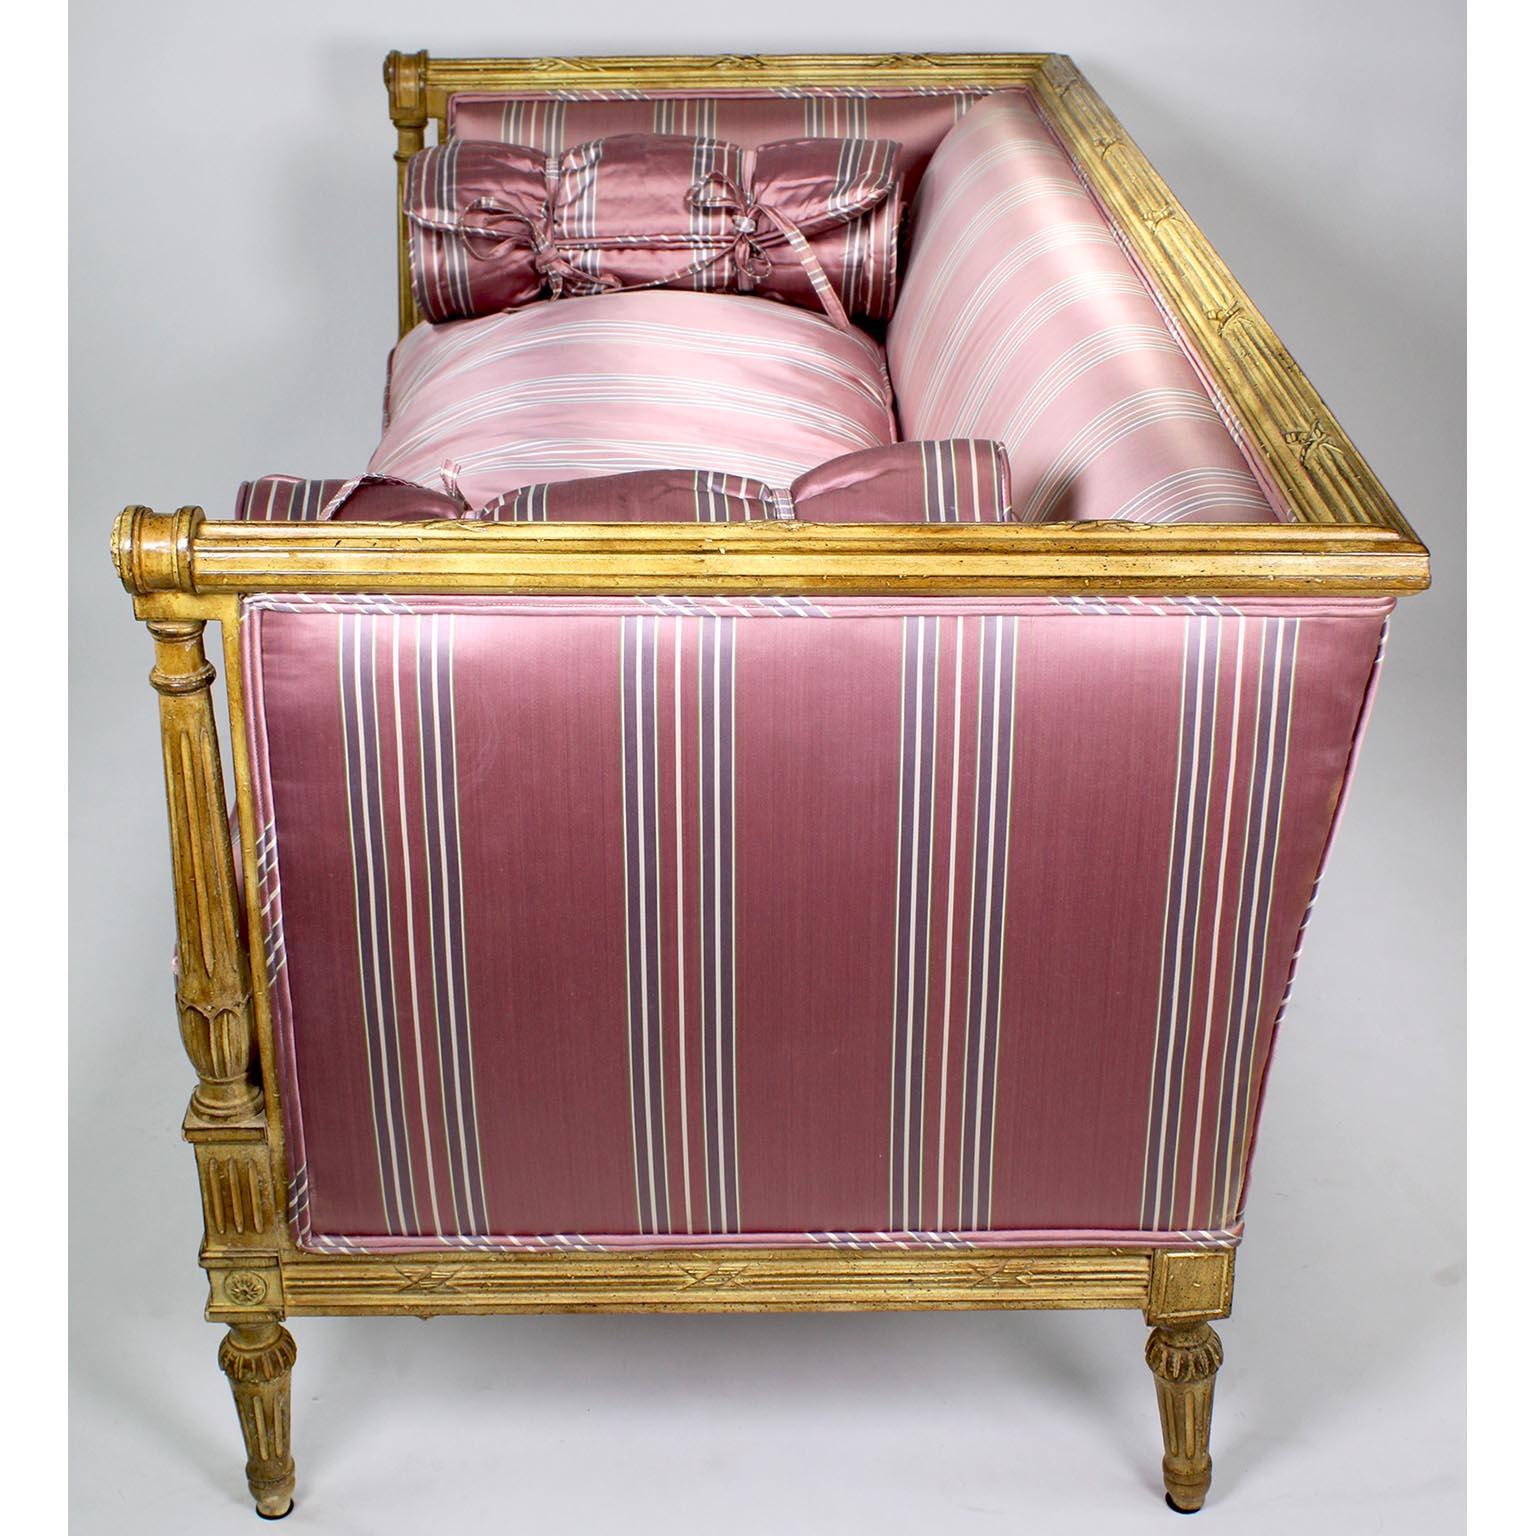 Pair of French Louis XVI Style Carved-Wood Cream-Lacquered Settees, Jansen Attr. For Sale 3